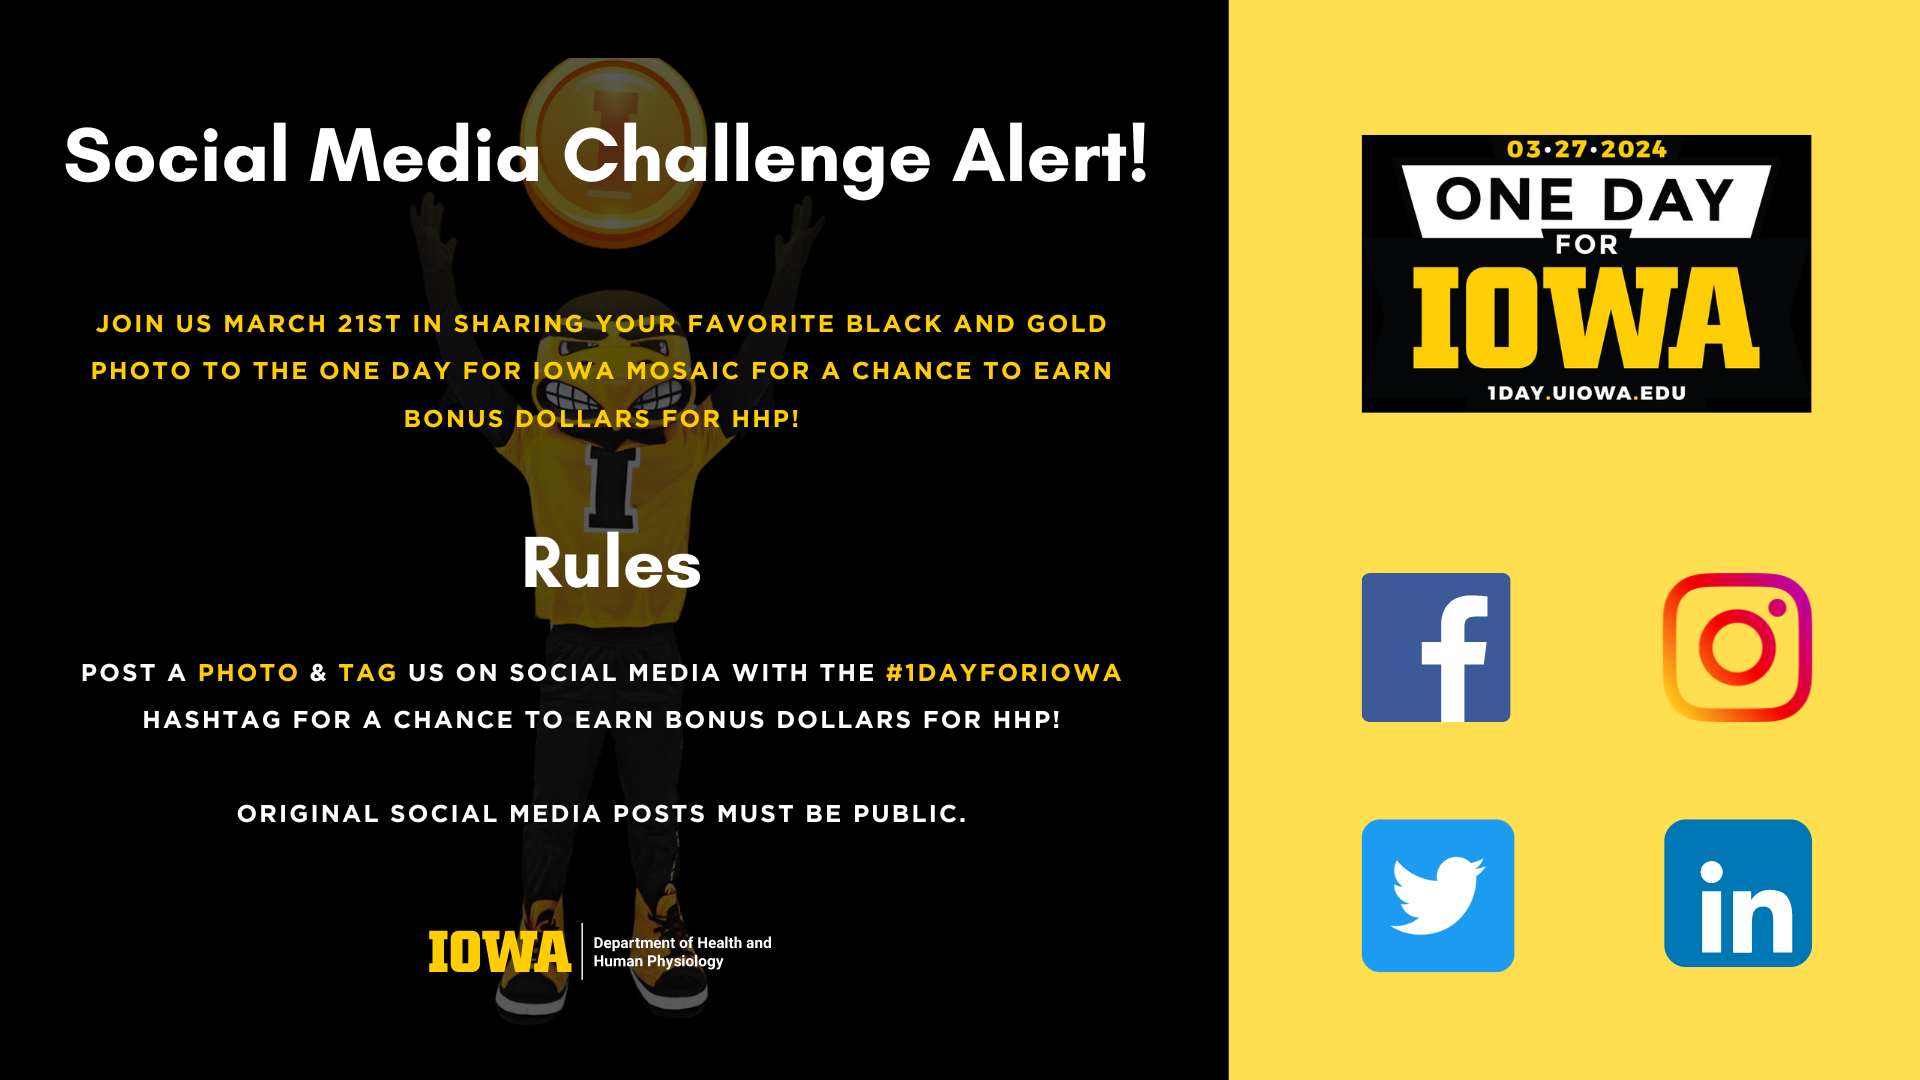 Join us in One Day for Iowa social media challenge!